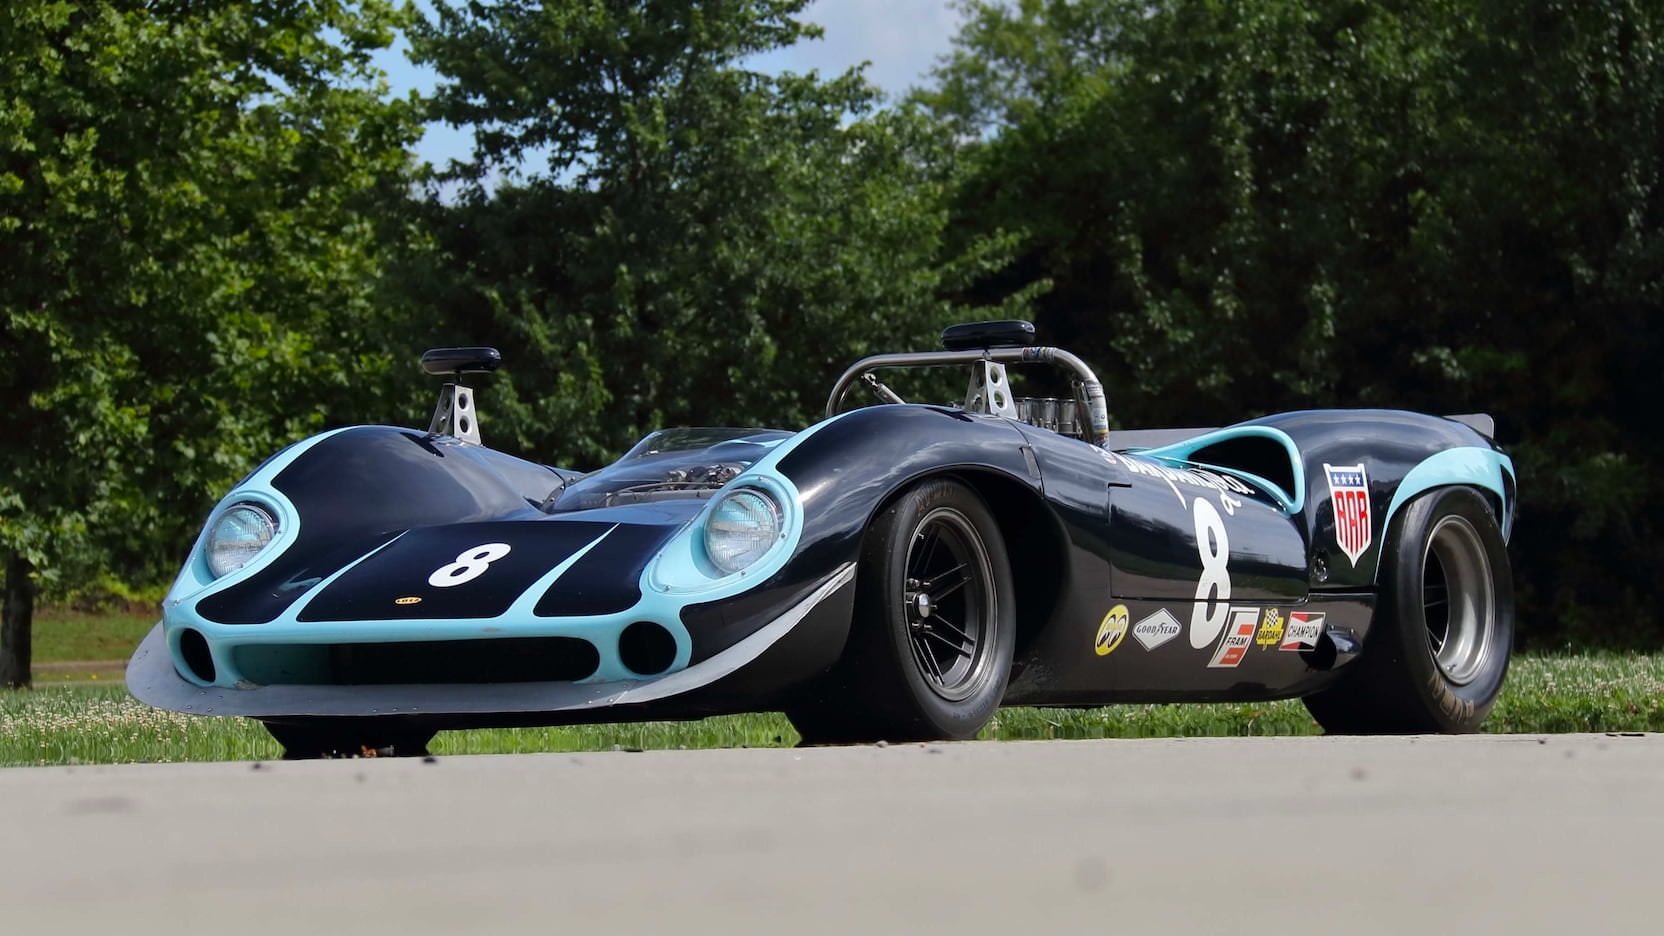 Lola T70 MkI Spyder – Owned by Carroll Shelby and Dan Gurney via @Silodrome